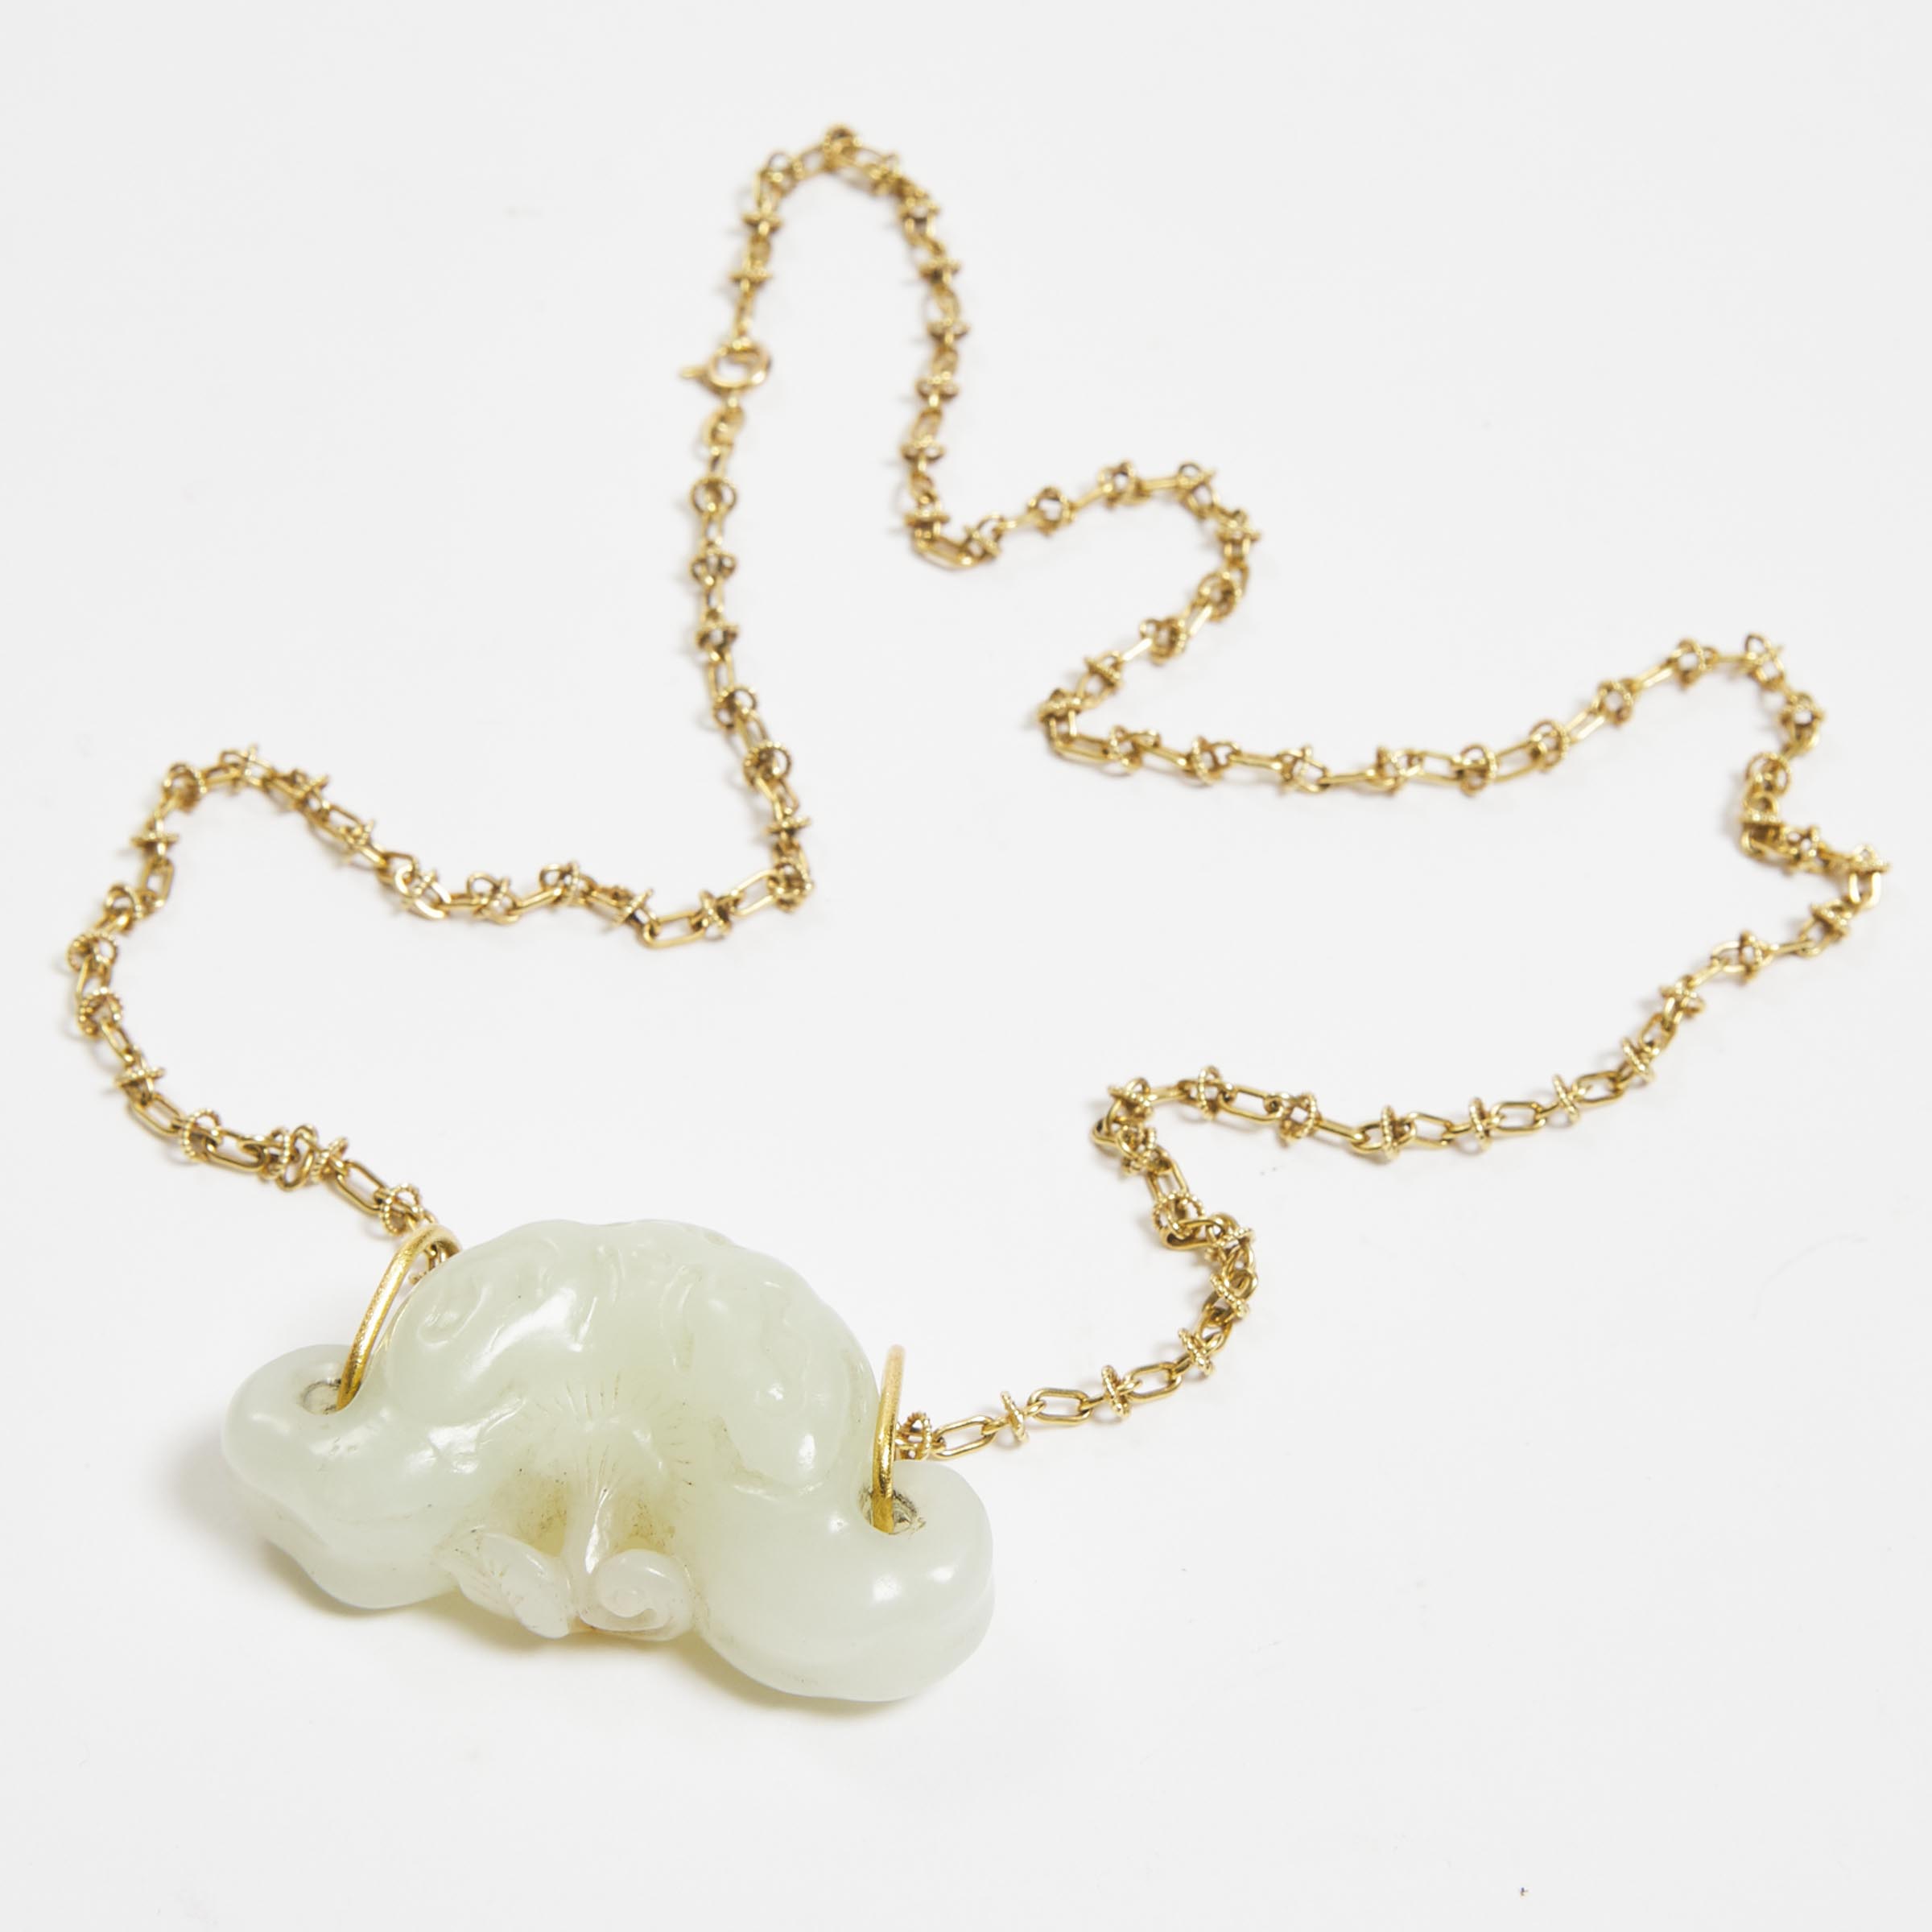 A White Jade Carving of a Water 3ac47b